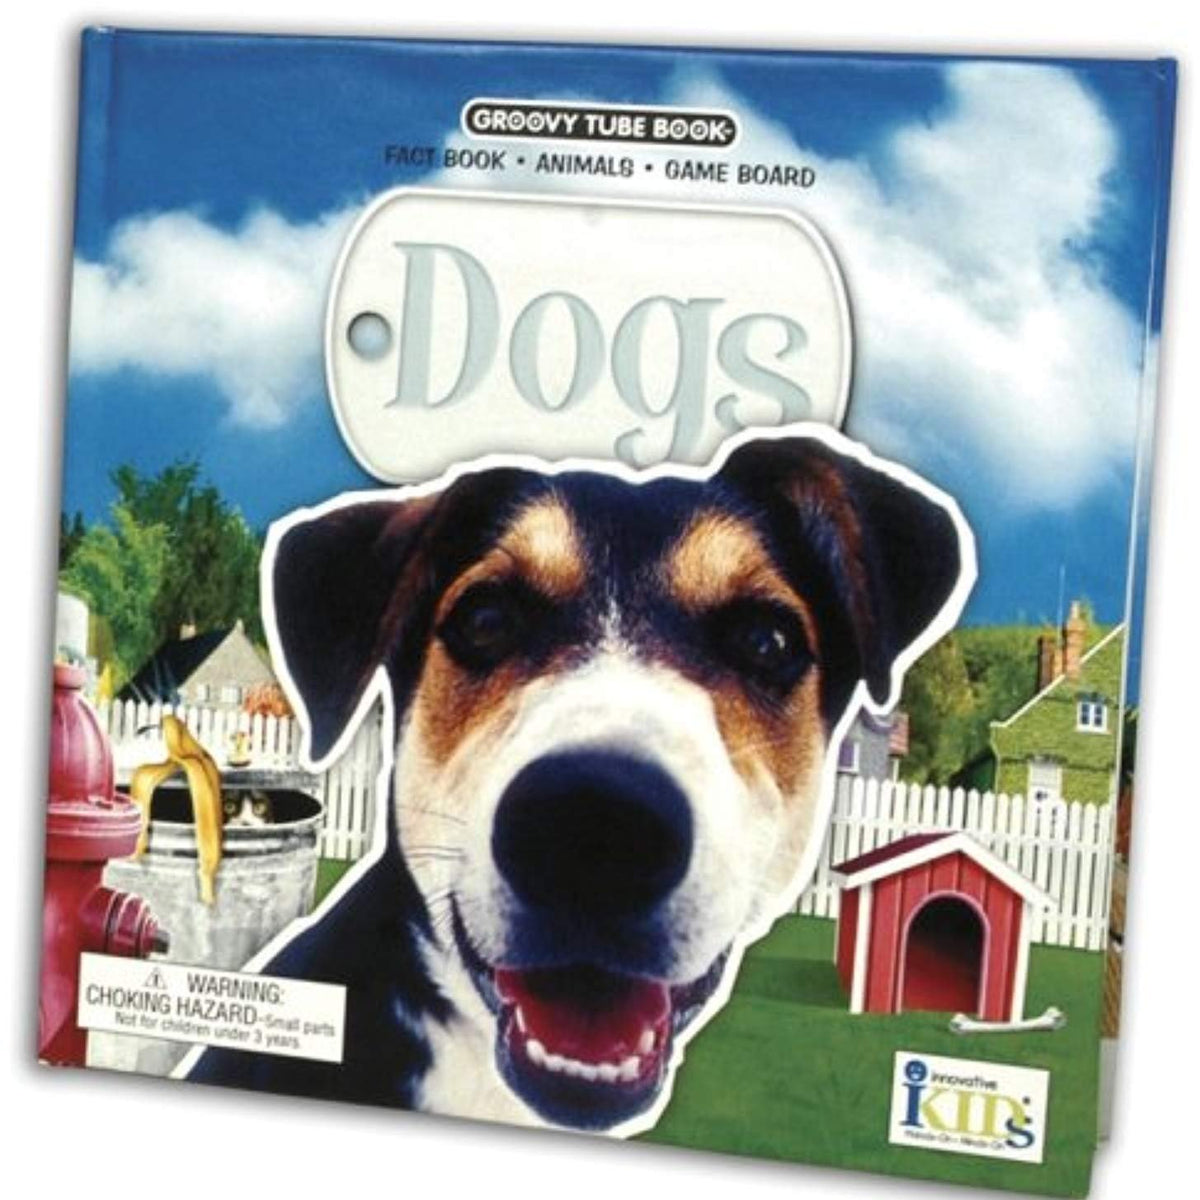 (Used)　Hardcover　Susan　Ring,　Dogs　Tube　by　Book),　(Groovy　Express　—　Books